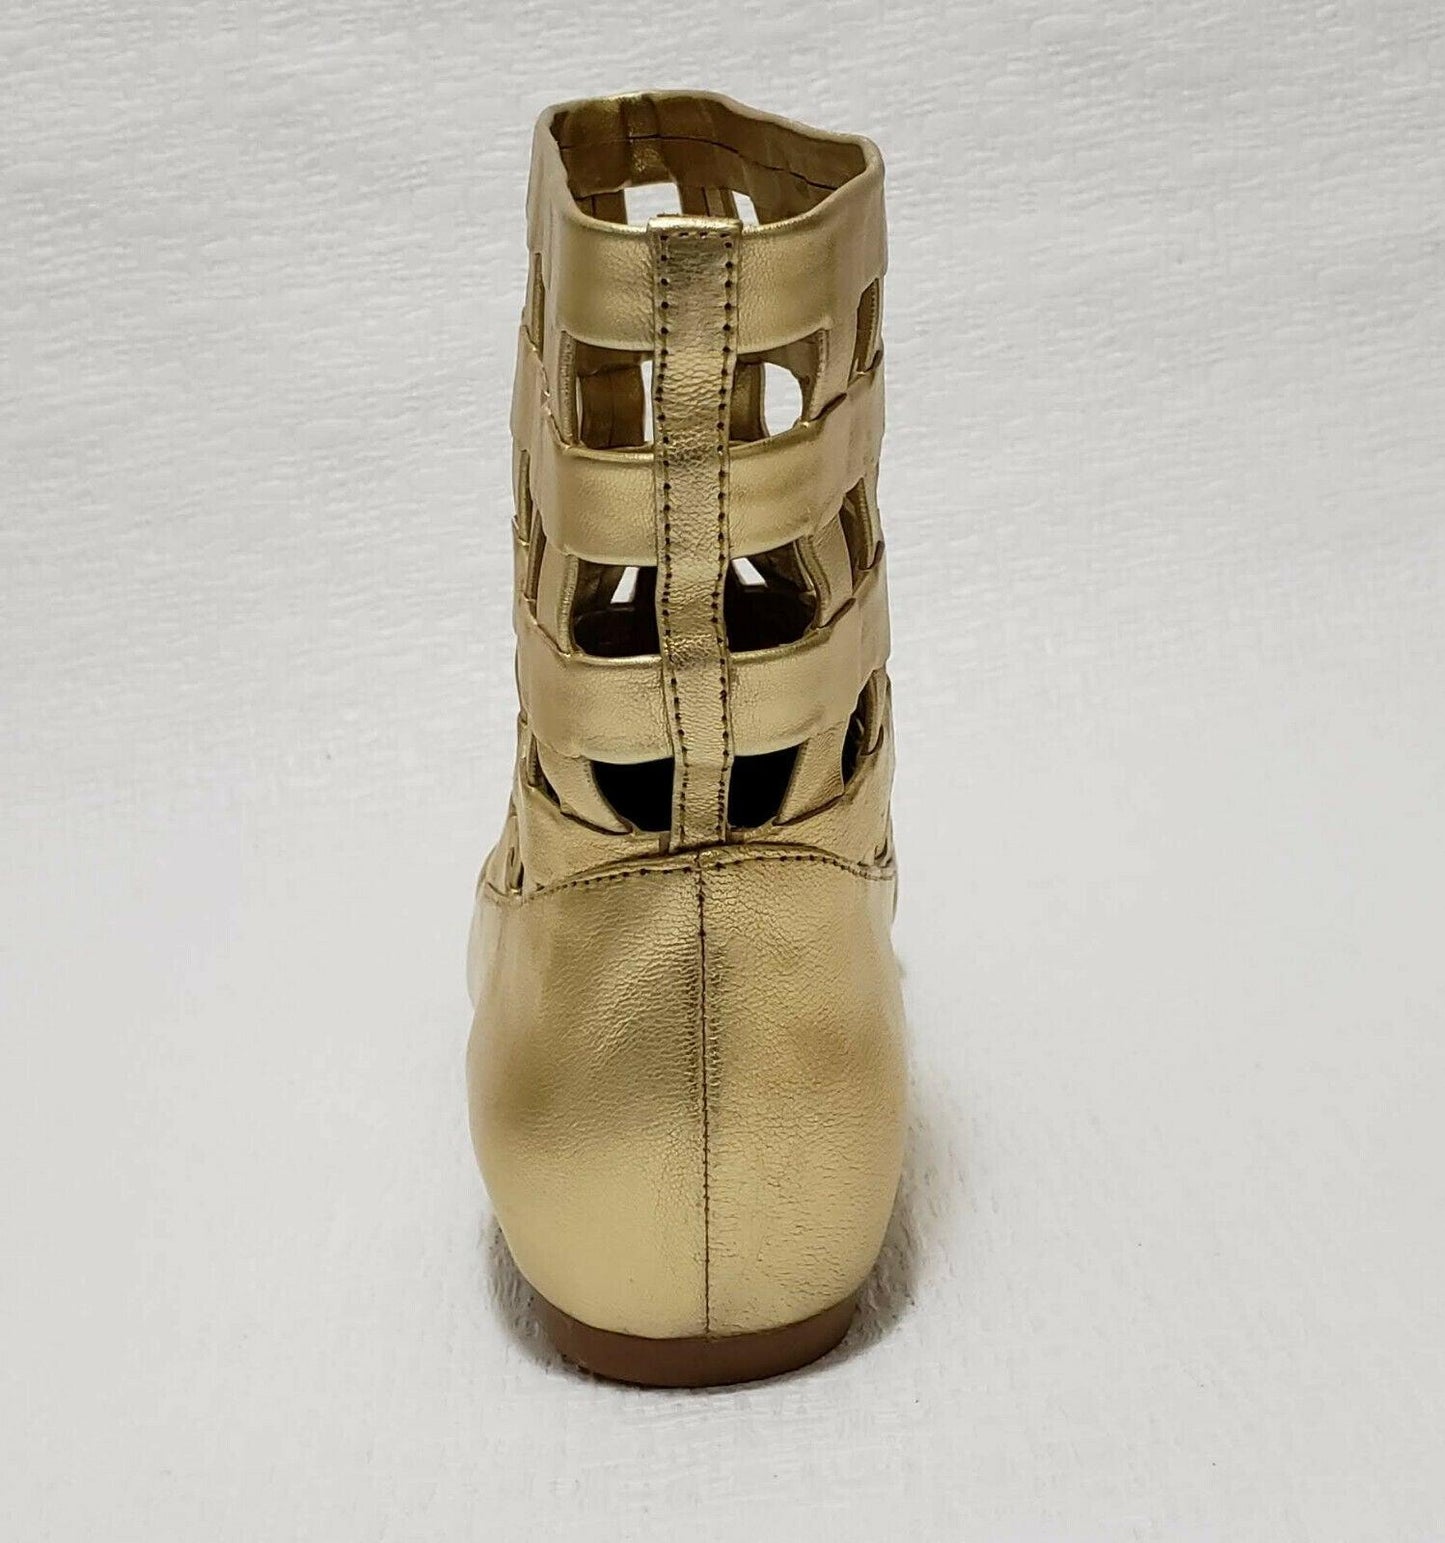 Jeffrey Campbell  Bueller Metallic Gold Womens Fashion Leather Ankle Booties US 7.5 - SVNYFancy